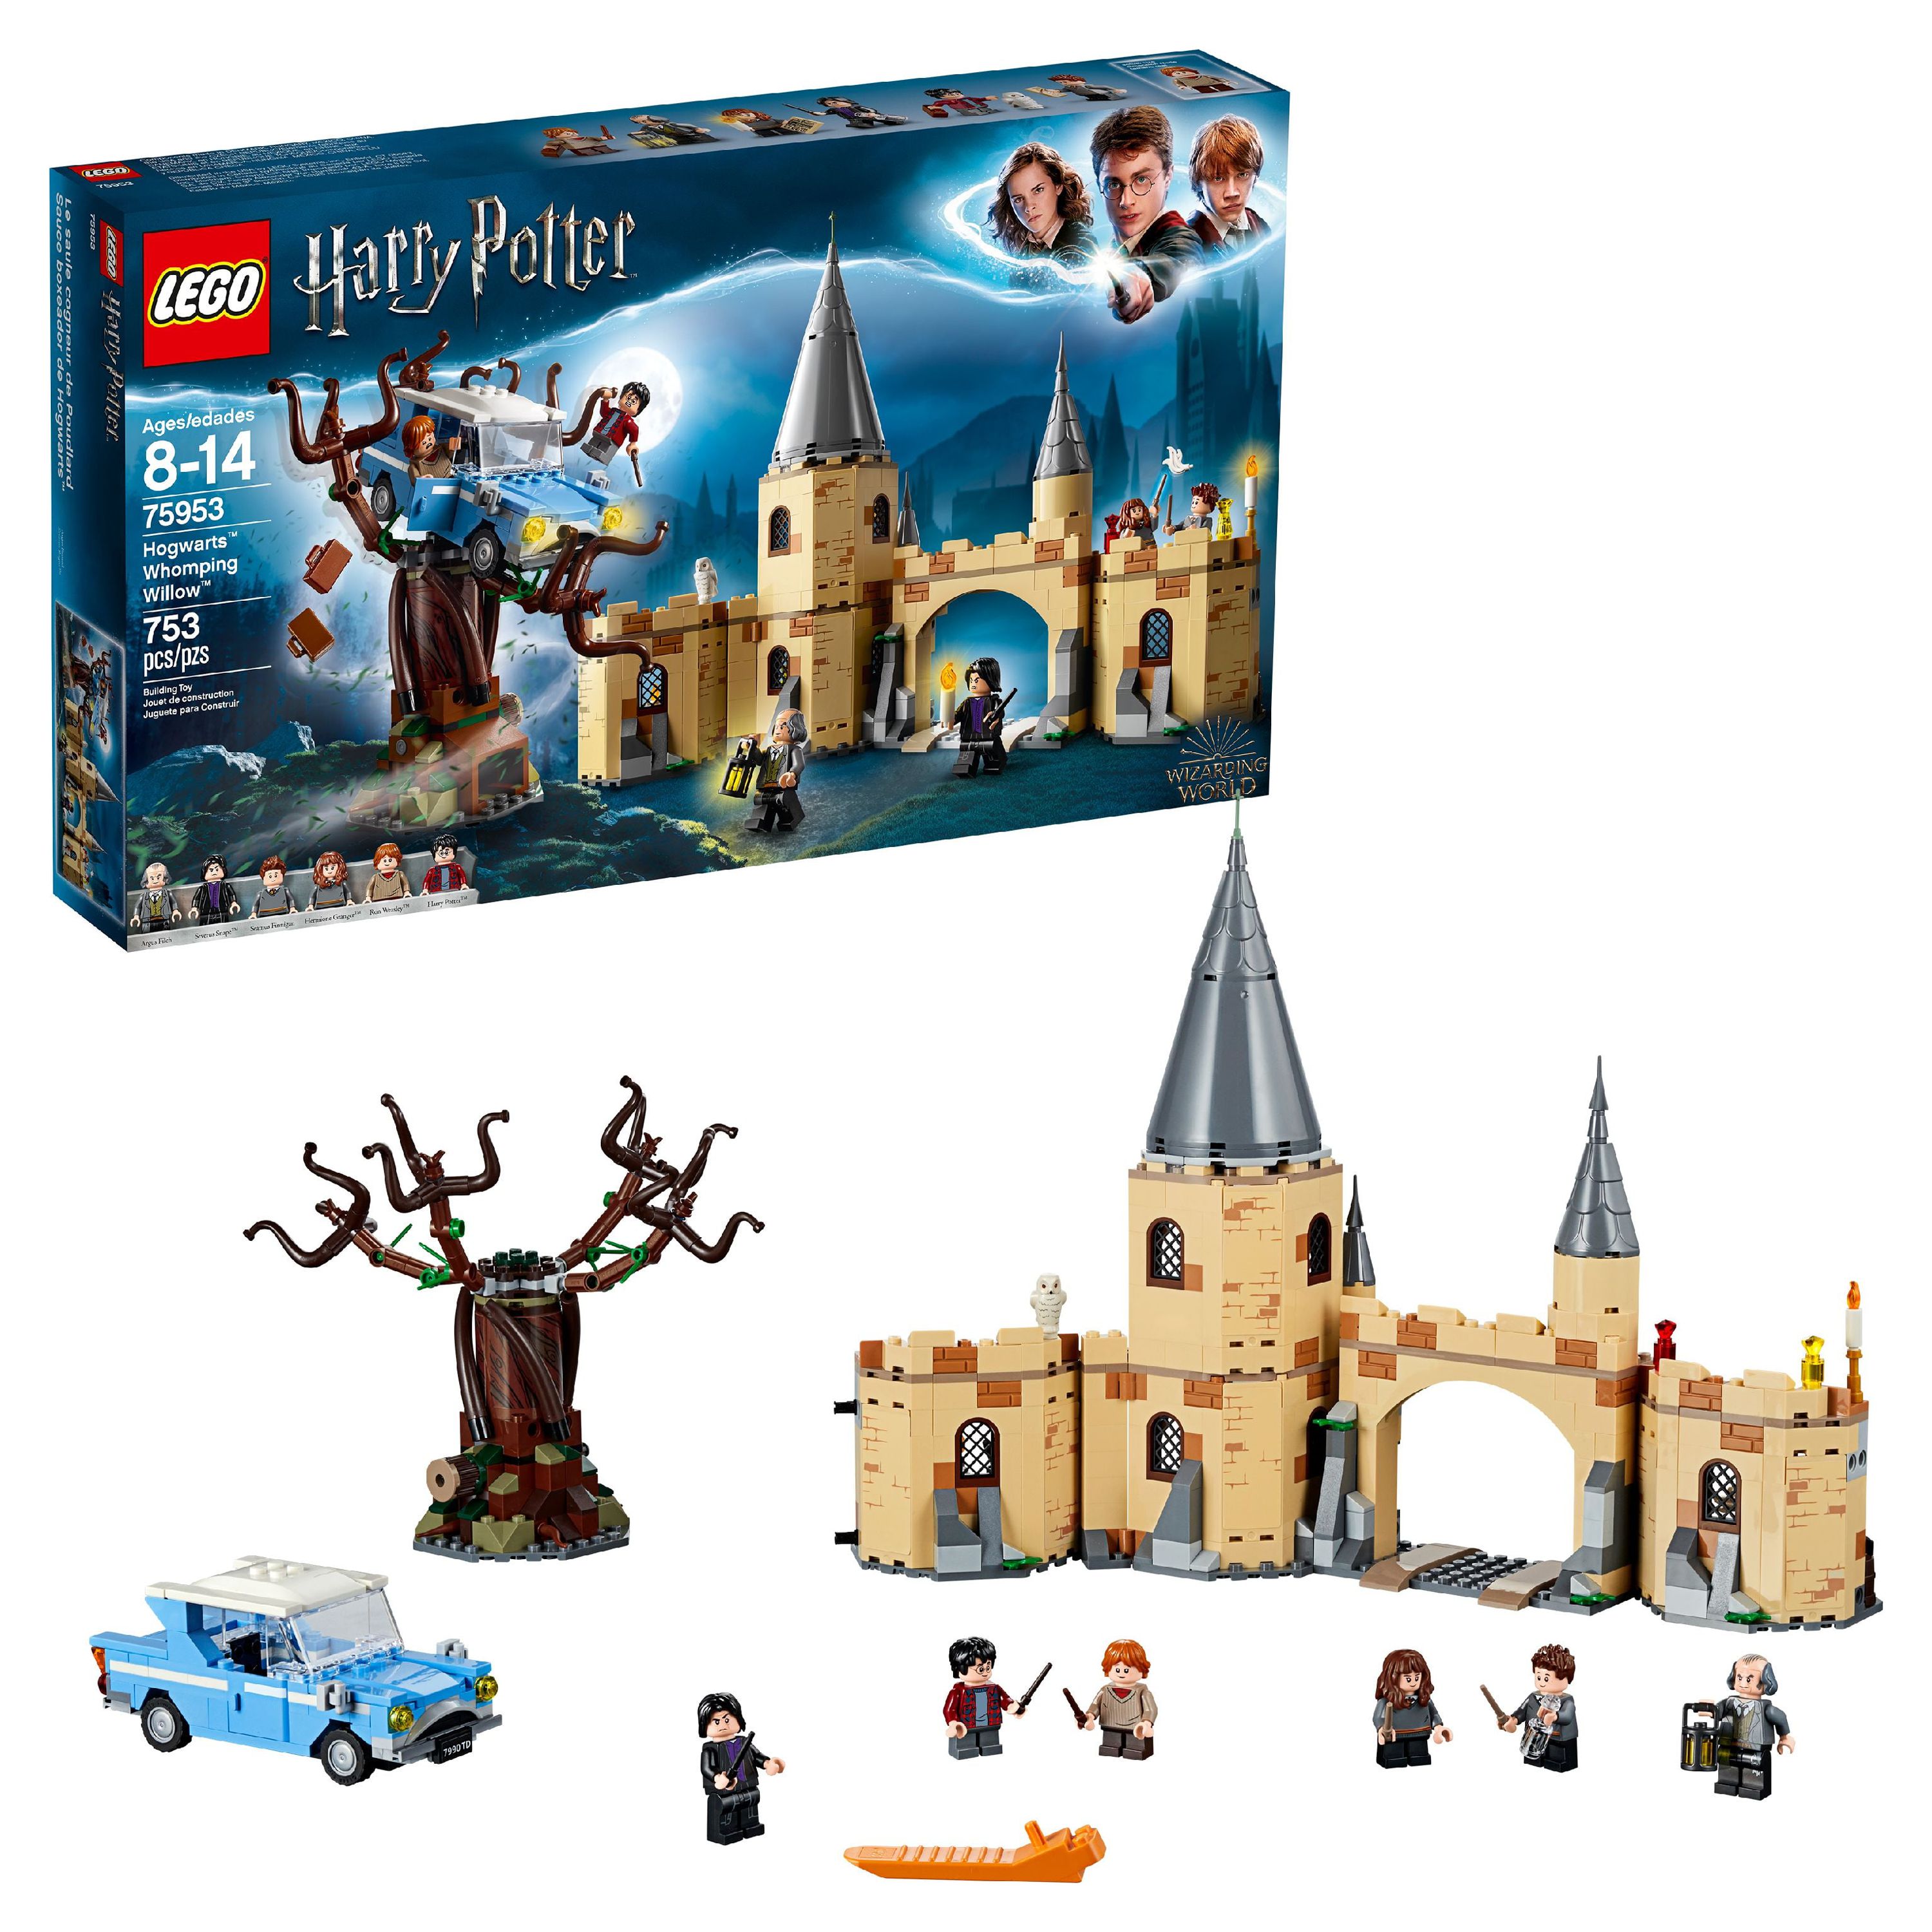 LEGO Harry Potter Hogwarts Whomping Willow 75953 (753 Pieces) - image 1 of 8